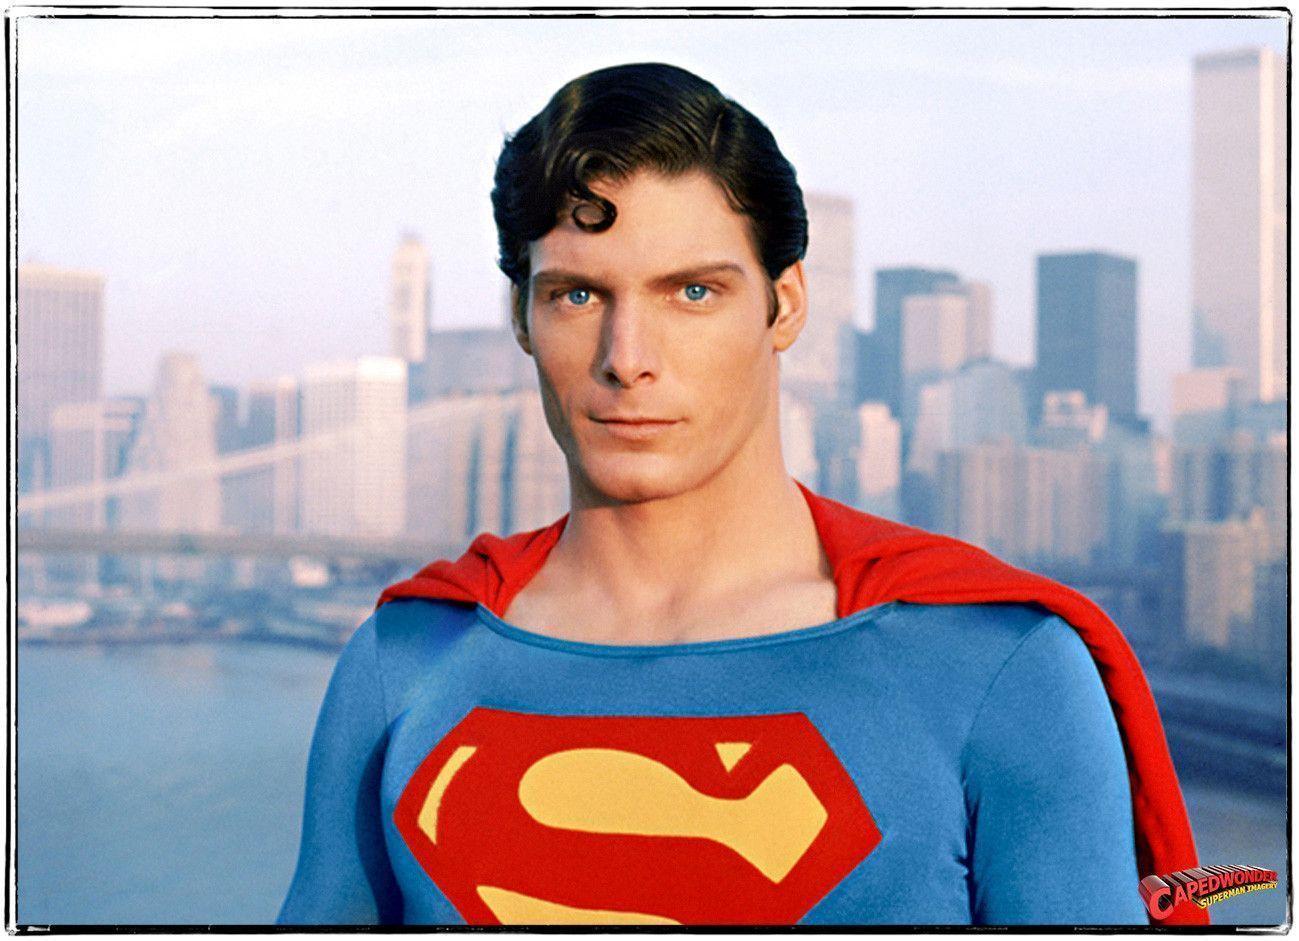 Tribute Letters. CapedWonder Superman Imagery. Christopher Reeve